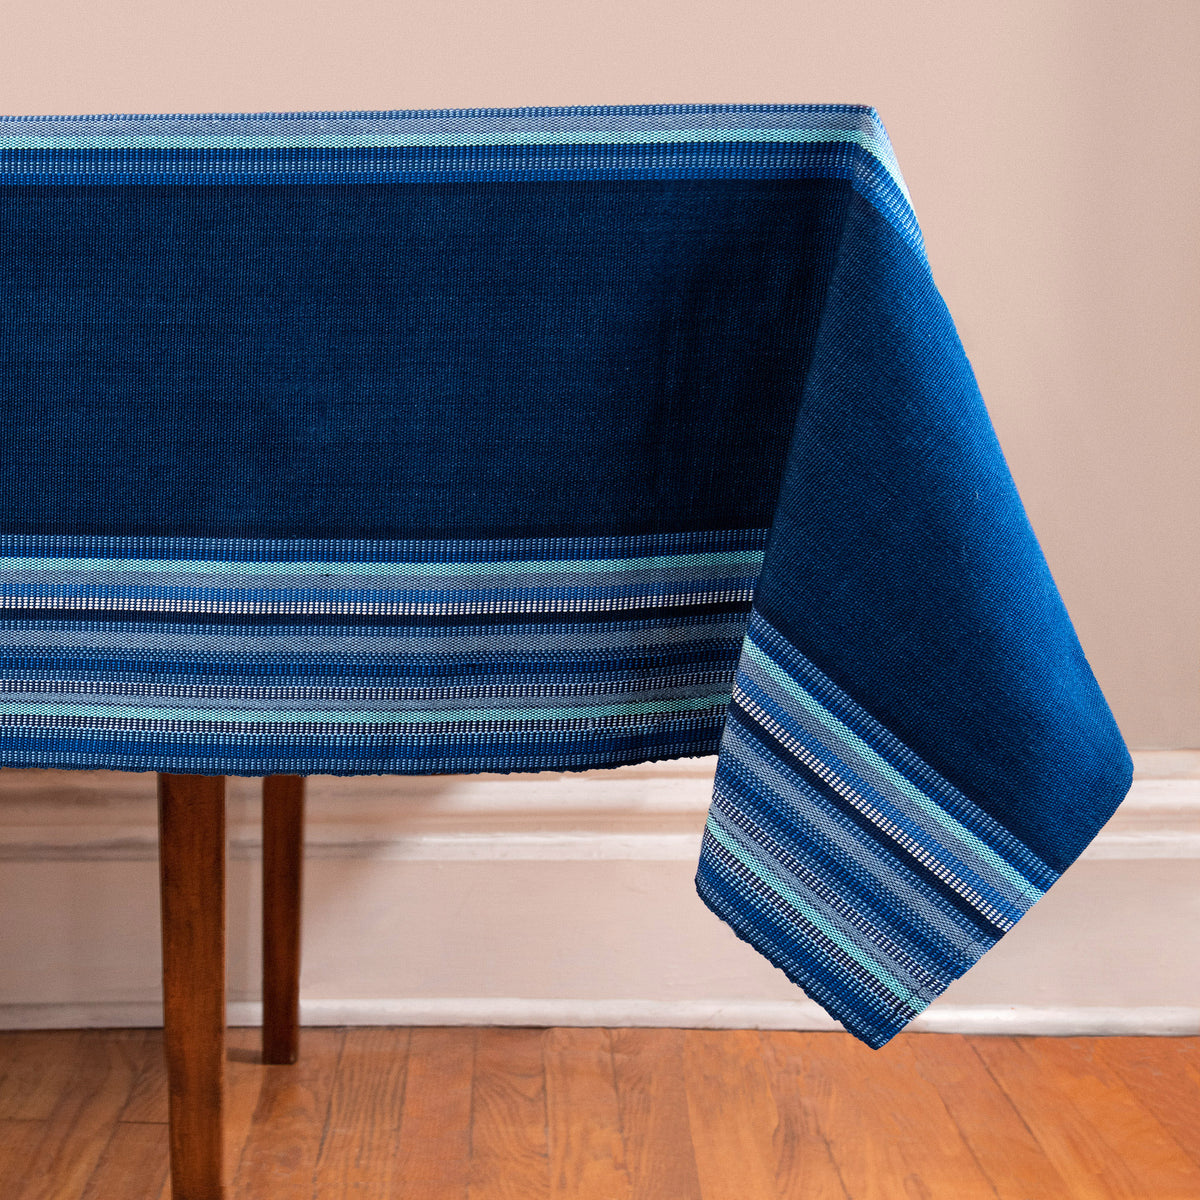 Handwoven Tablecloth with stripes in blues and indigo